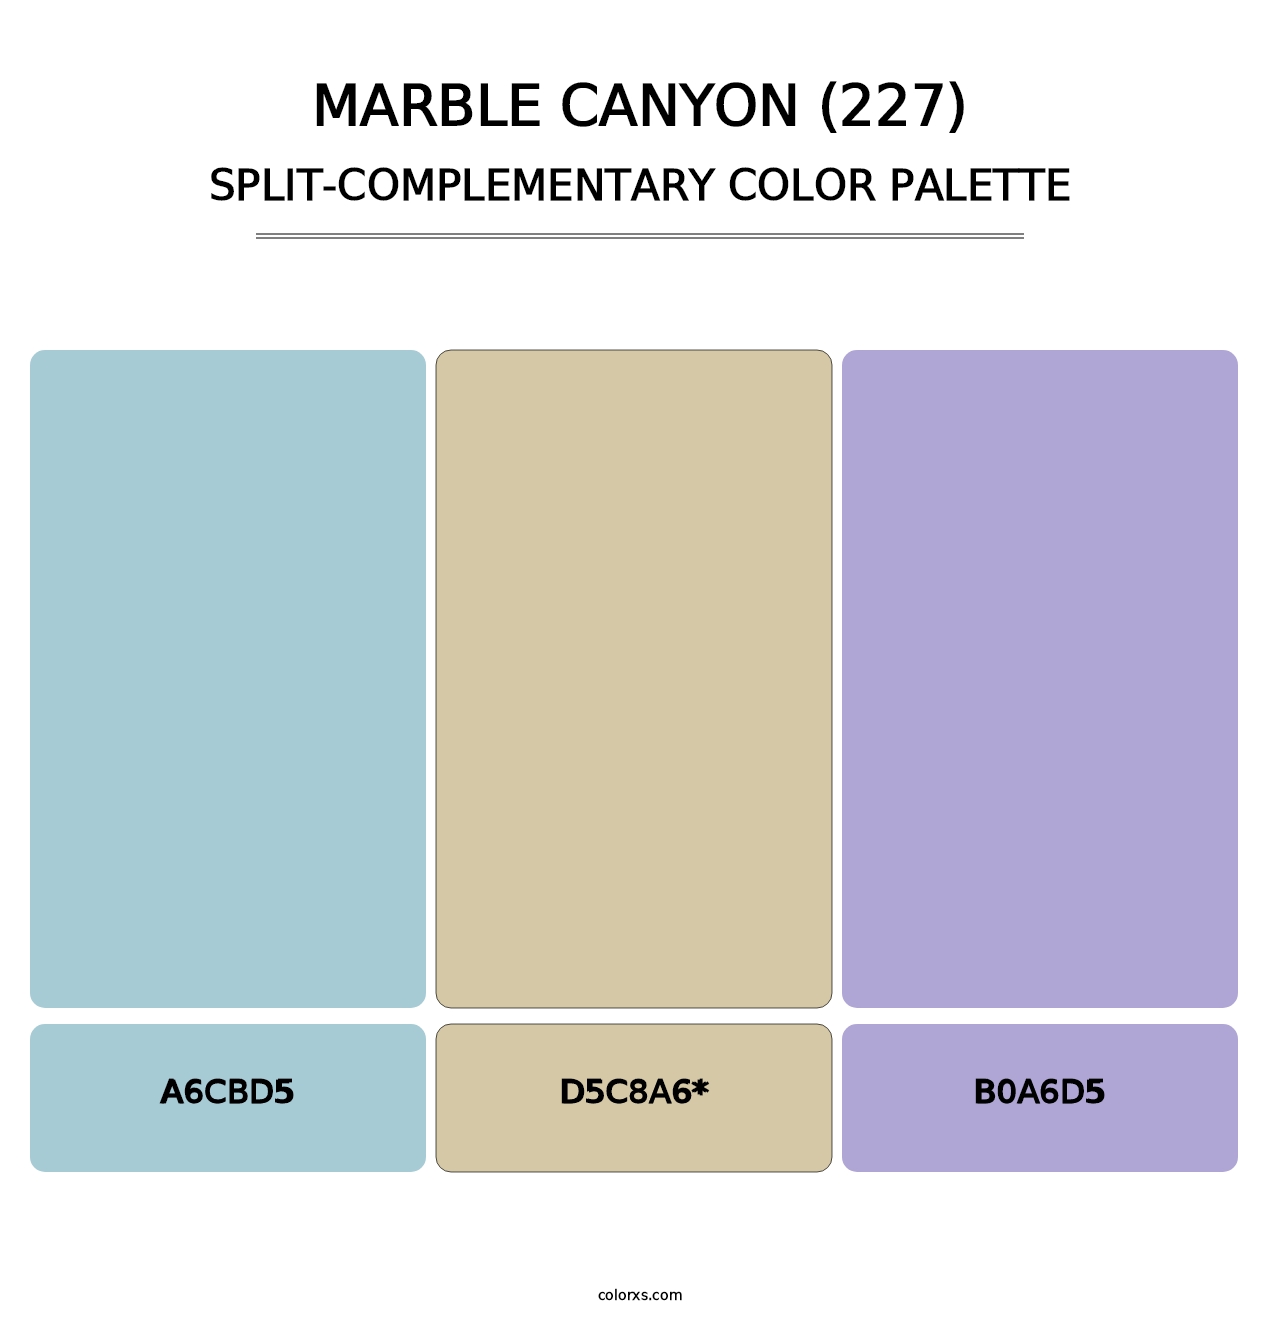 Marble Canyon (227) - Split-Complementary Color Palette